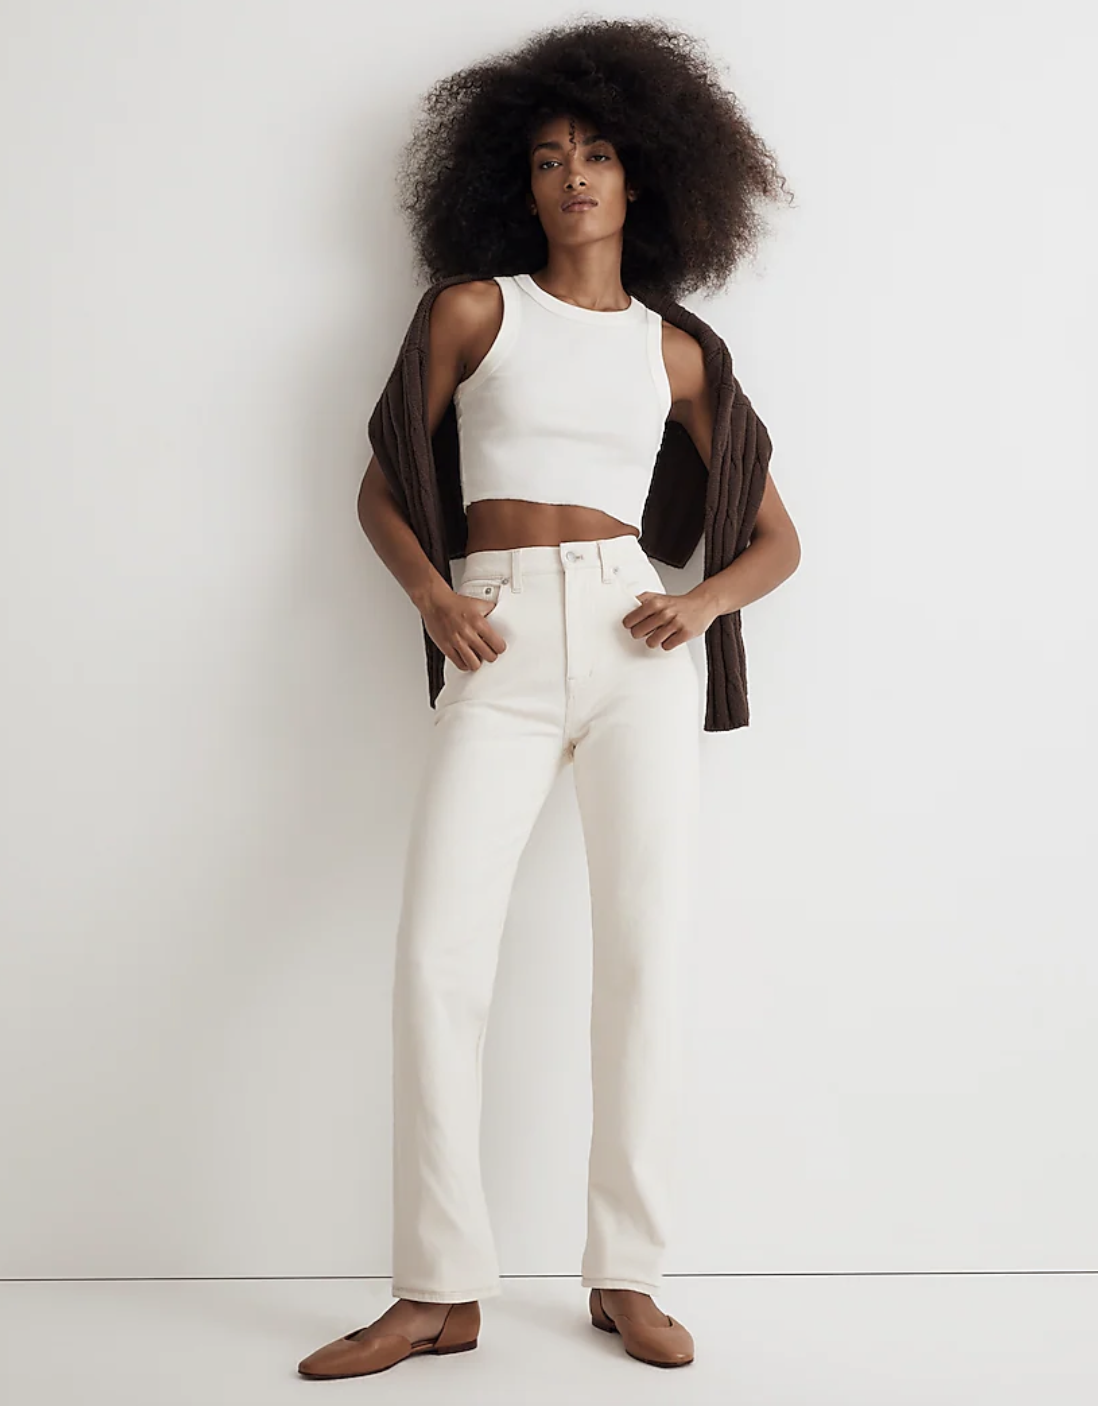 Model wearing white jeans, white sweater, and tan shoes